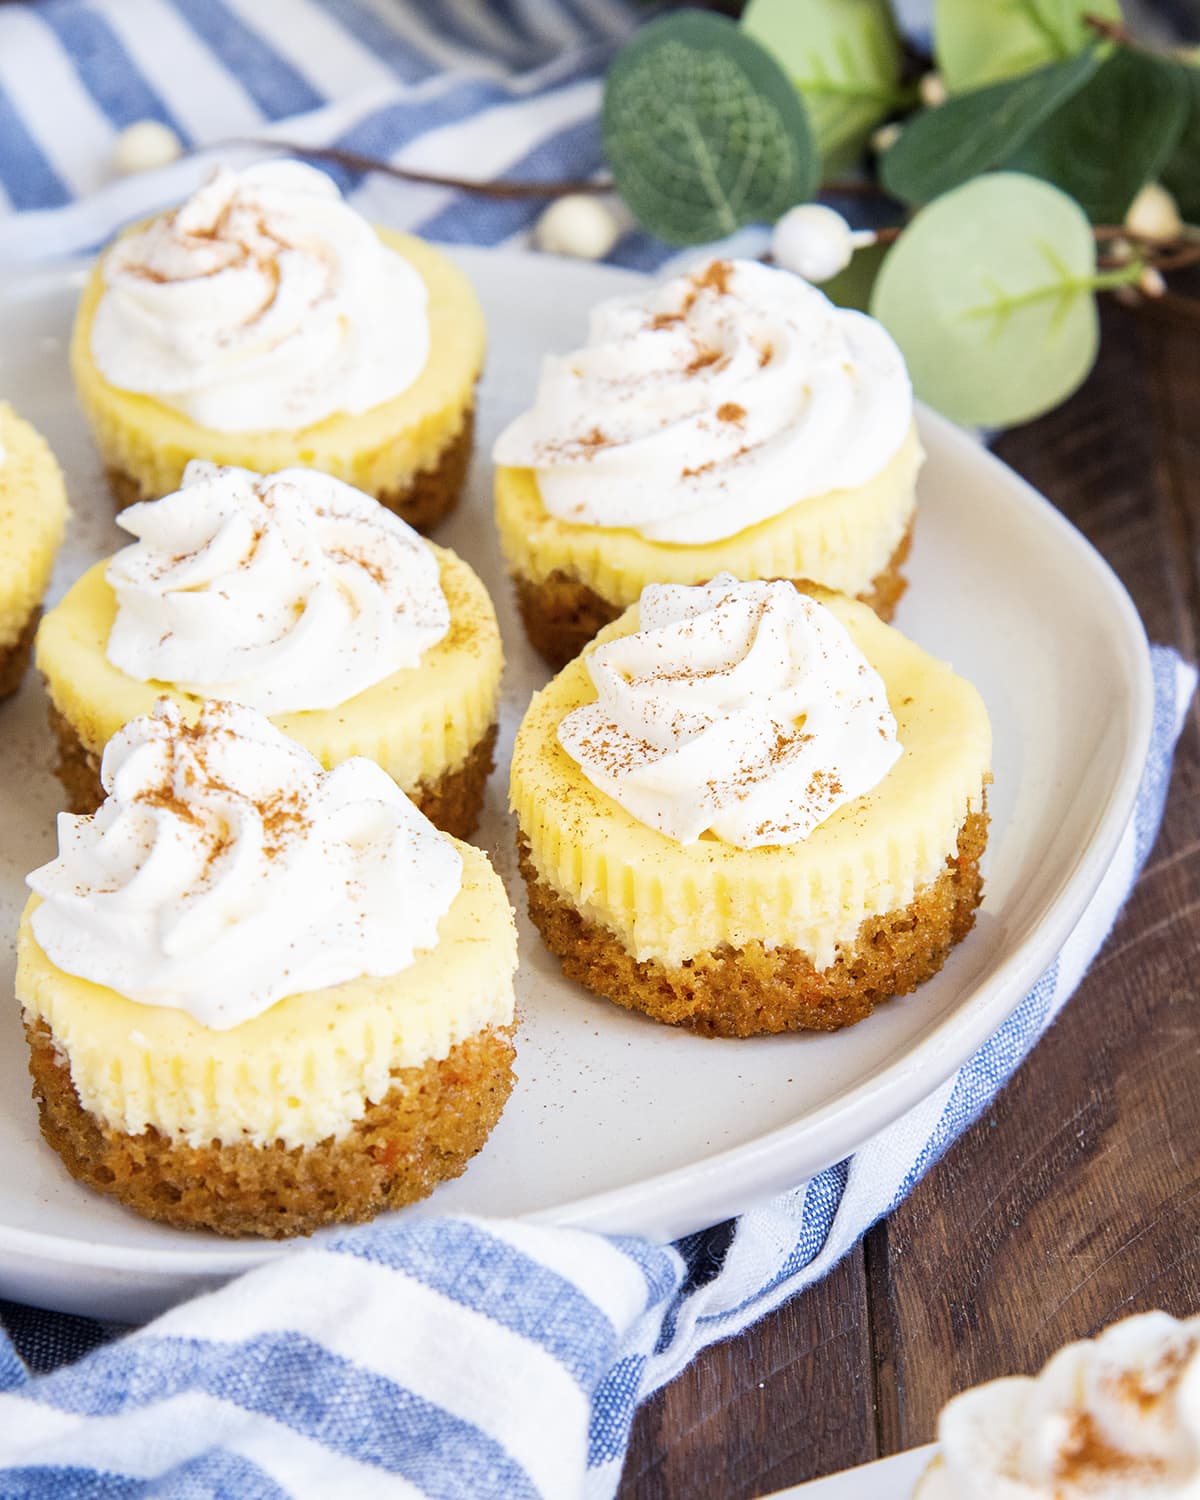 A plate of mini cheesecakes with a carrot cake crust, and topped with fresh whipped cream.